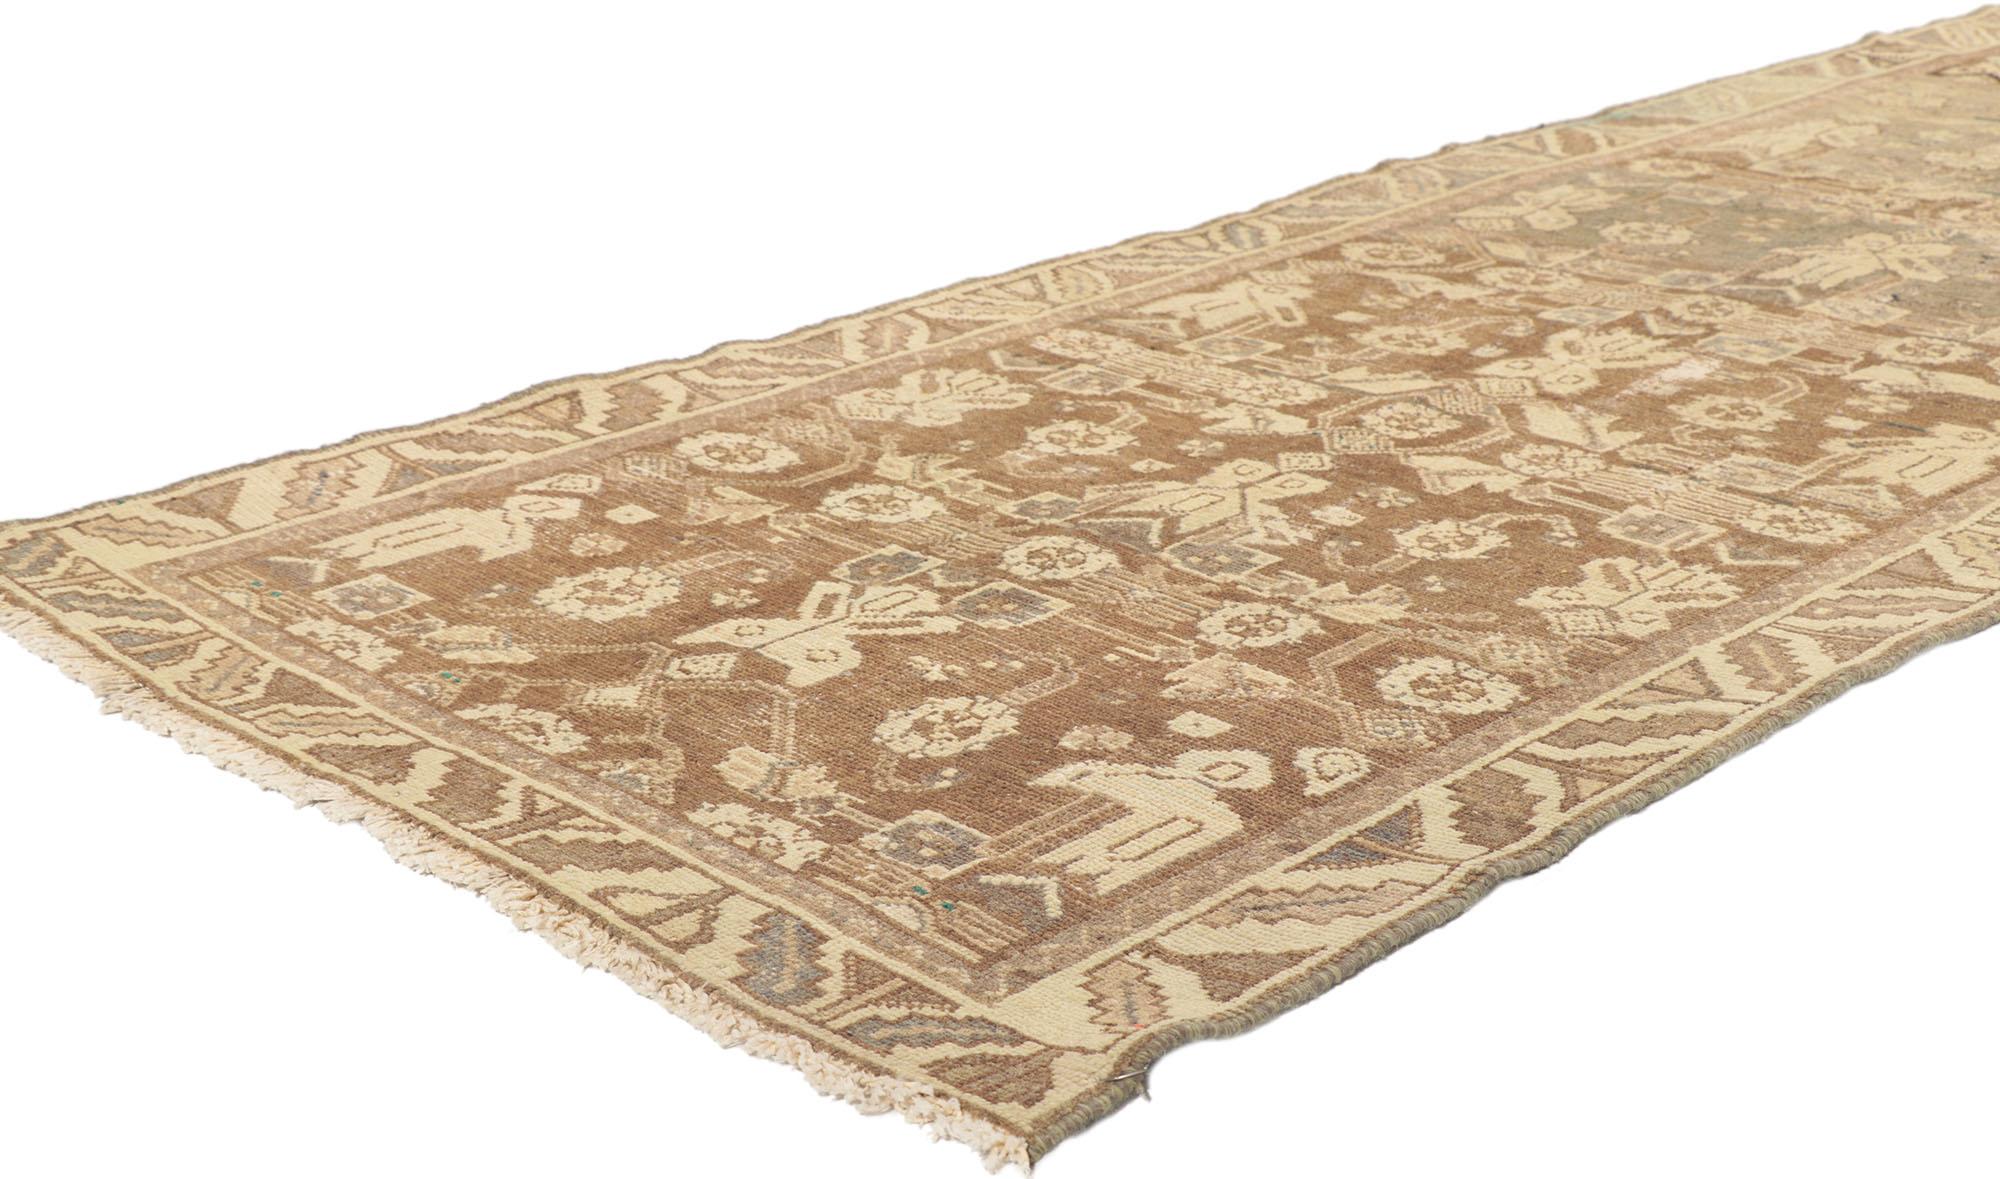 53748 Antique Persian Malayer Runner, 03'01 x 09'07. Perfect for a hallway, long entry, grand foyer, designer entryway, galley kitchen, corridor, long stair landing, grand parlor, home office, private library, conservatory, wine cellar, executive